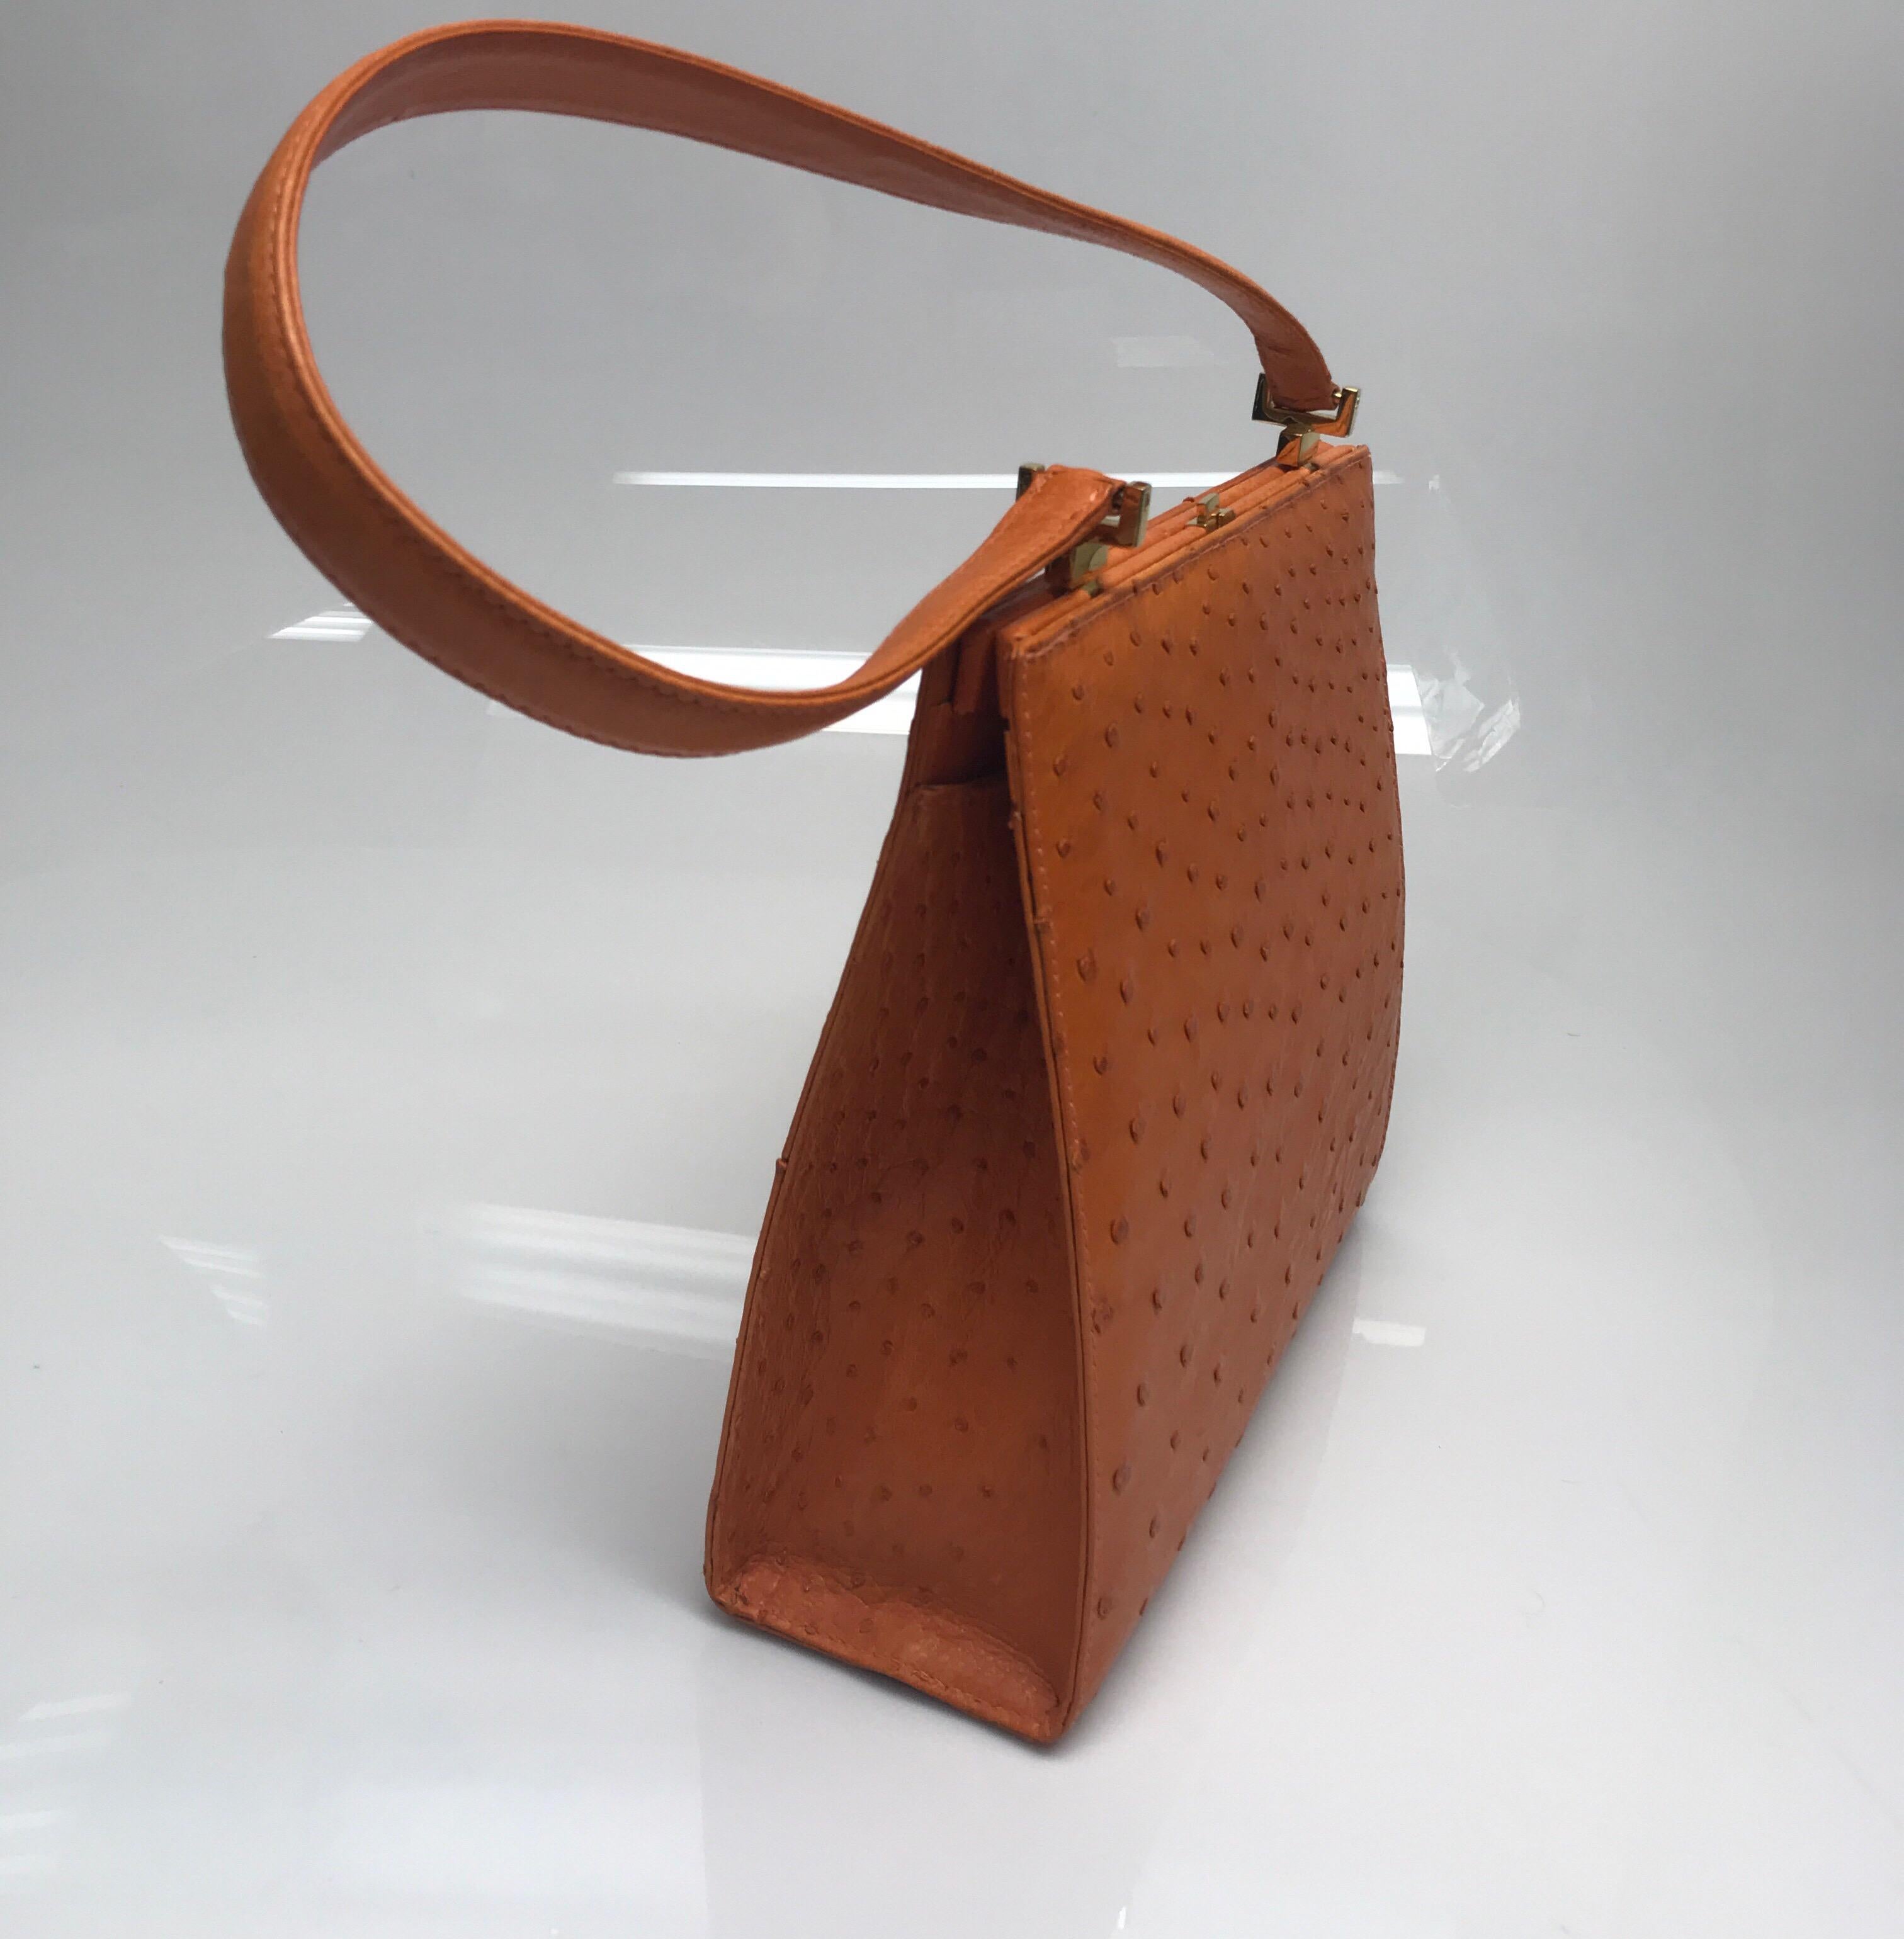 Giorgio's Palm Beach Orange Klein Karoo Ostrich Leather Purse. This beautiful Giorgio's Palm Beach purse is in excellent condition, it is brand new. It is made of orange ostrich leather and has gold hardware. There is one top handle. The purse is